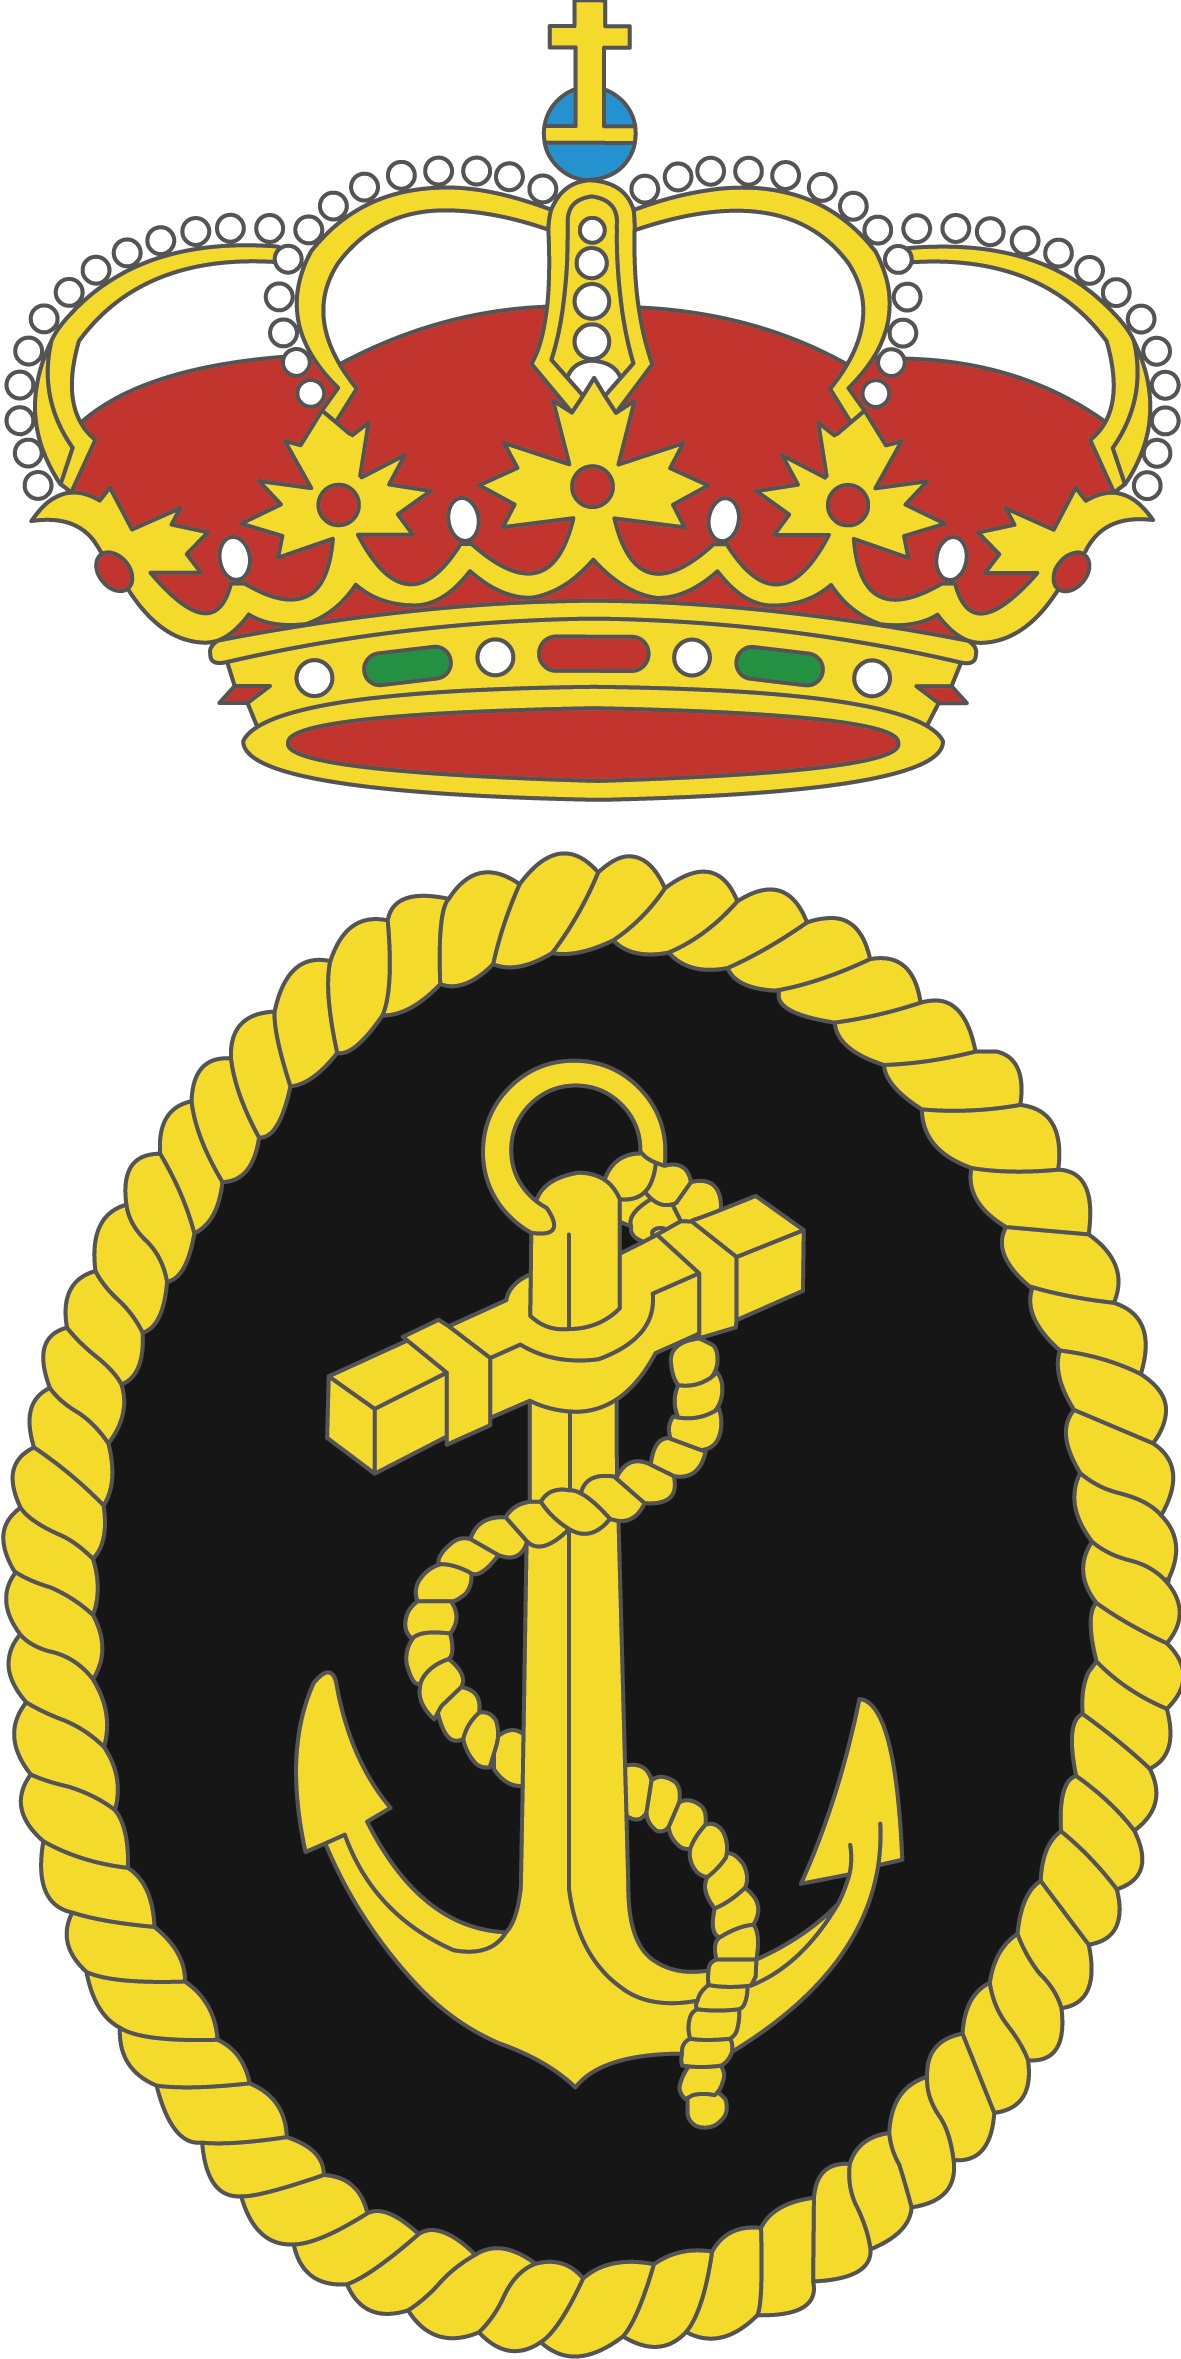 0 Result Images of Escudo Armada De Chile Png - PNG Image Collection